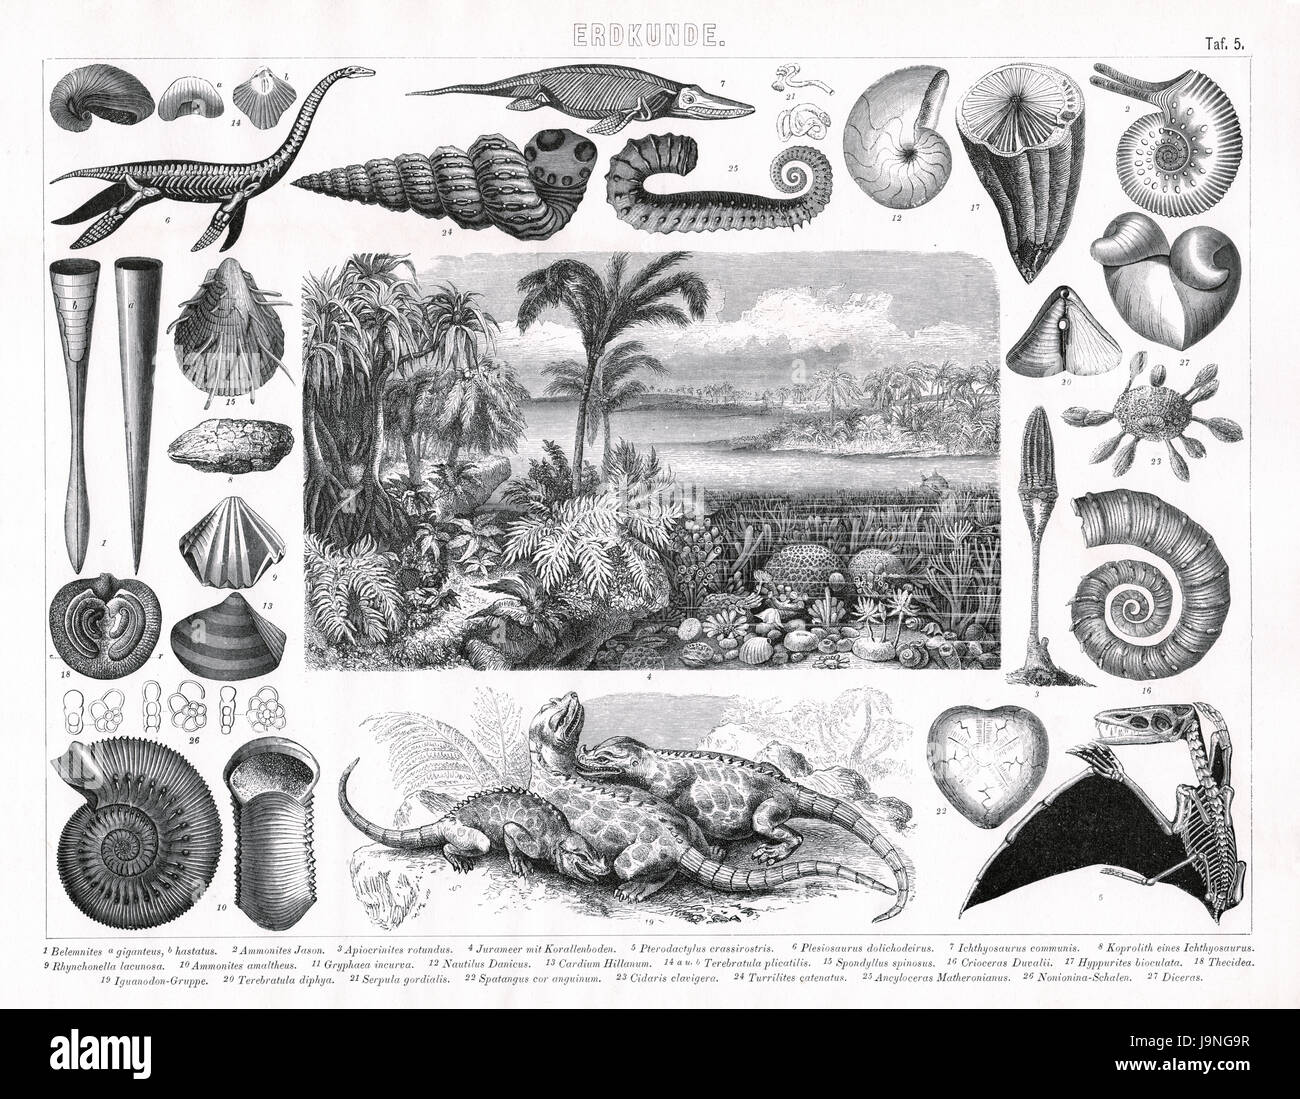 Plants and Animals from the Jurassic, Triassic and various other geological time periods. Stock Photo